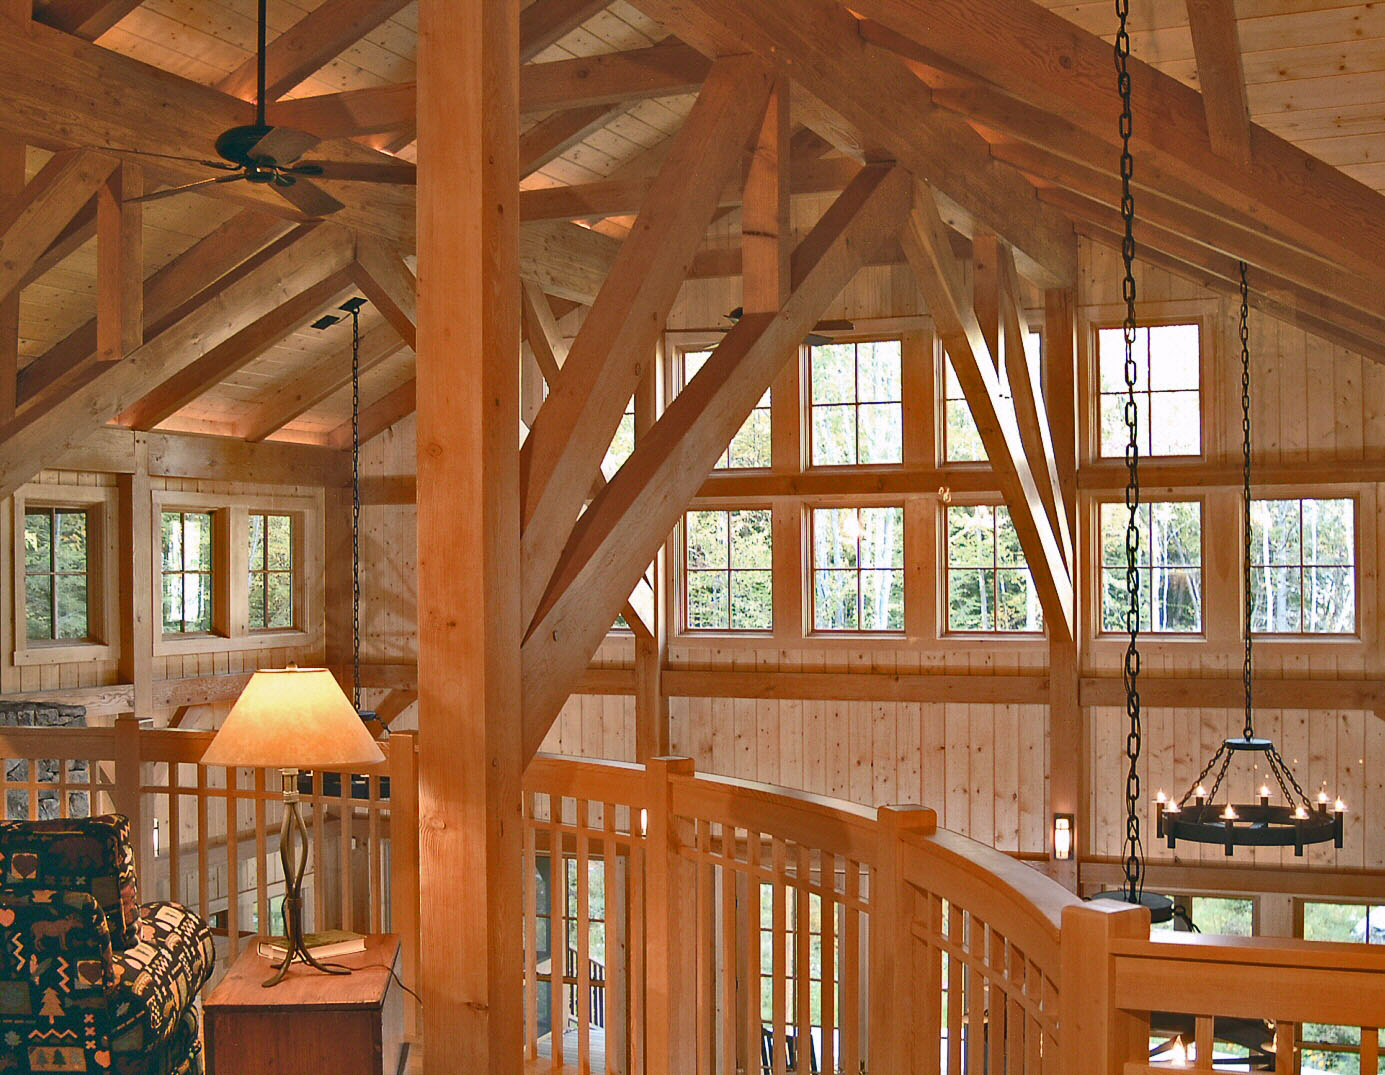 Squam Lake (4626) view at timber frame from loft